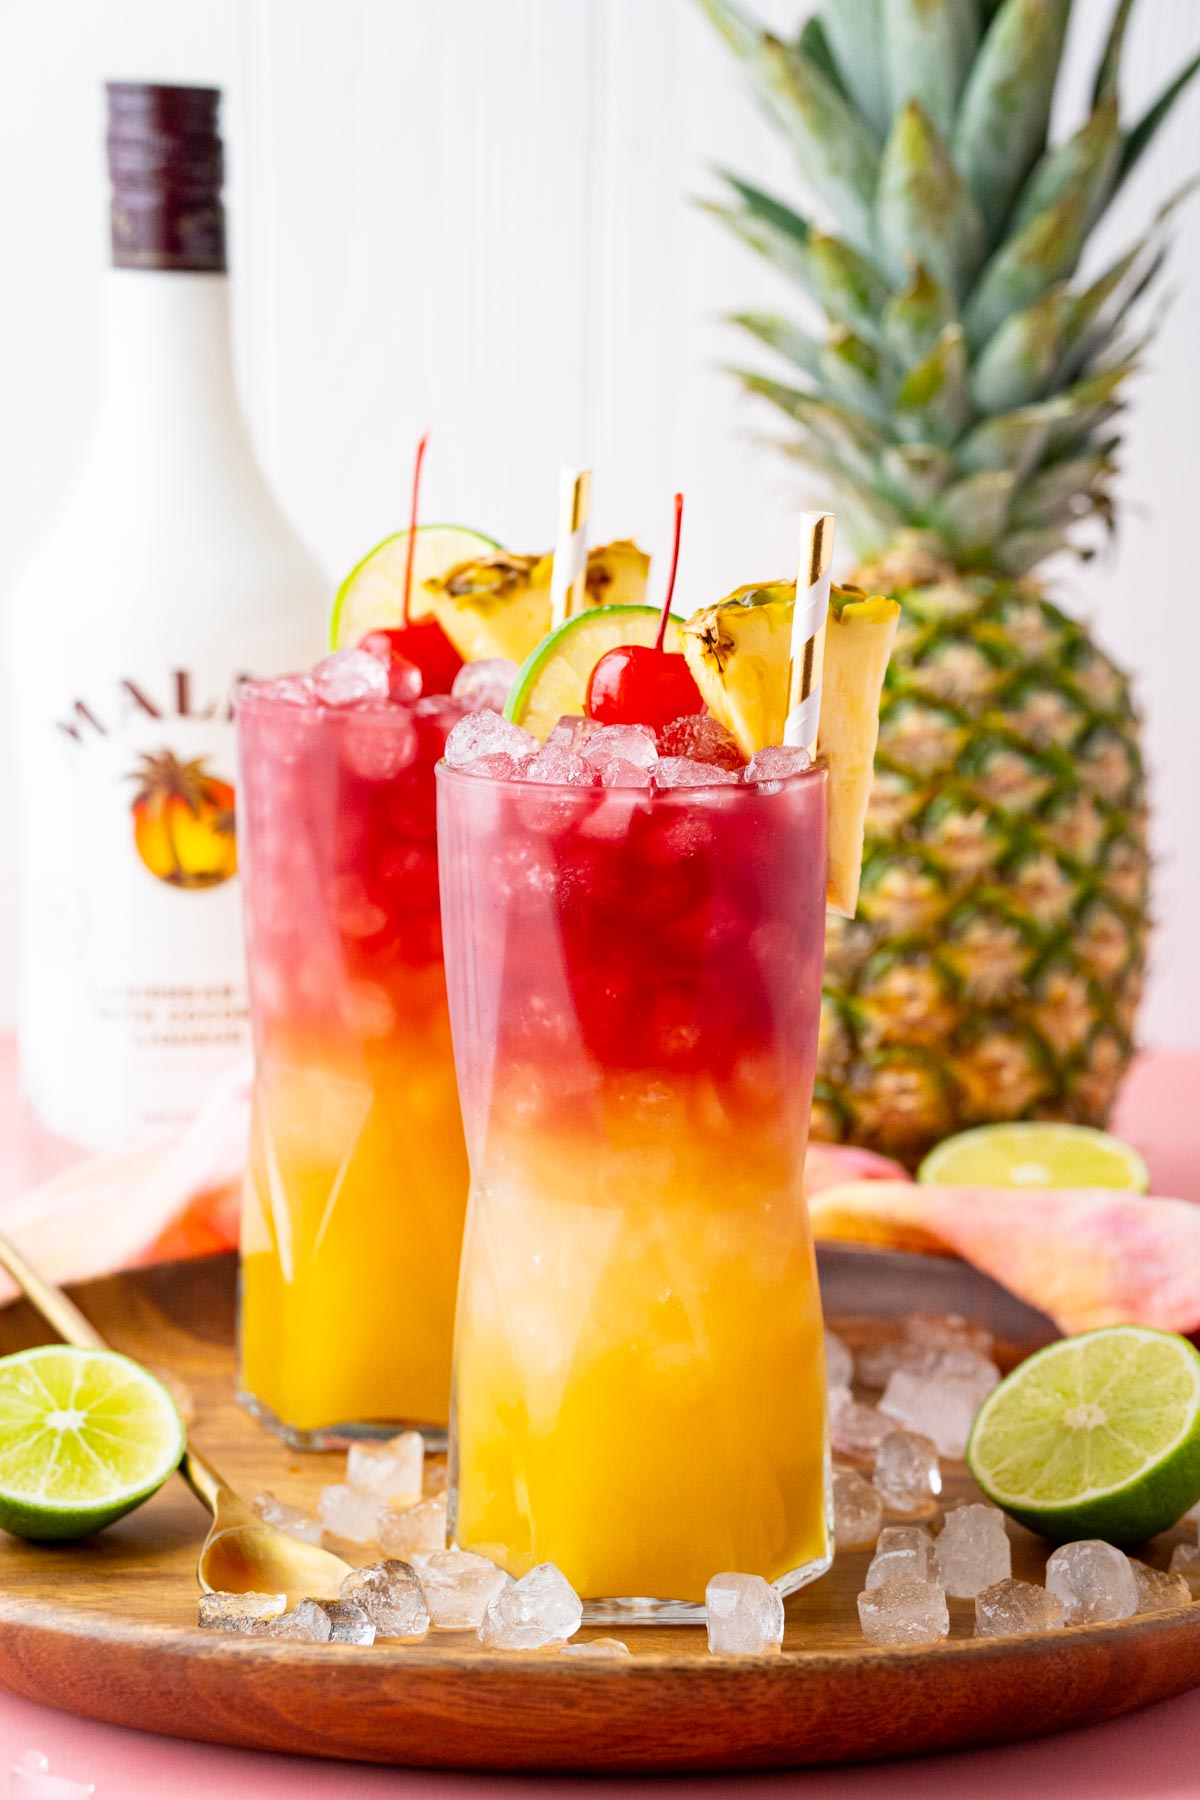 rum drinks with pineapple juice and cranberry